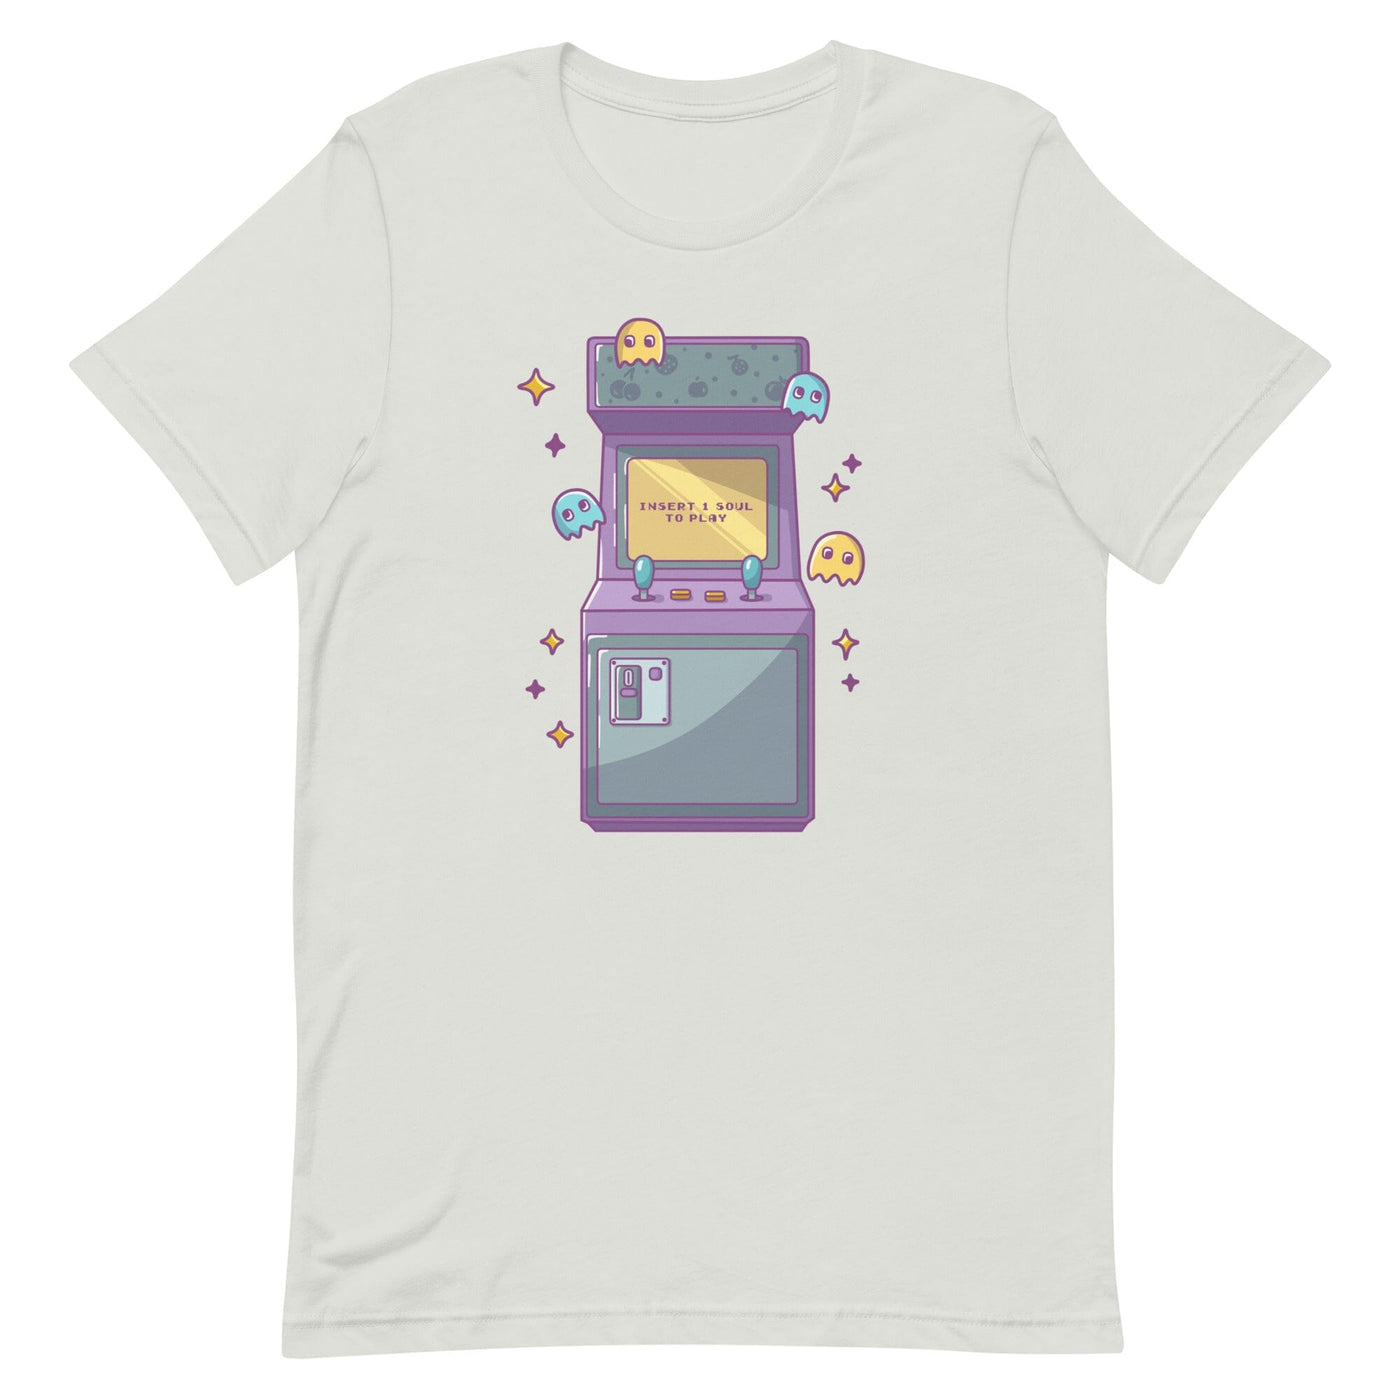 Insert 1 Soul to Play | Unisex t-shirt | Retro Gaming Threads & Thistles Inventory Silver S 